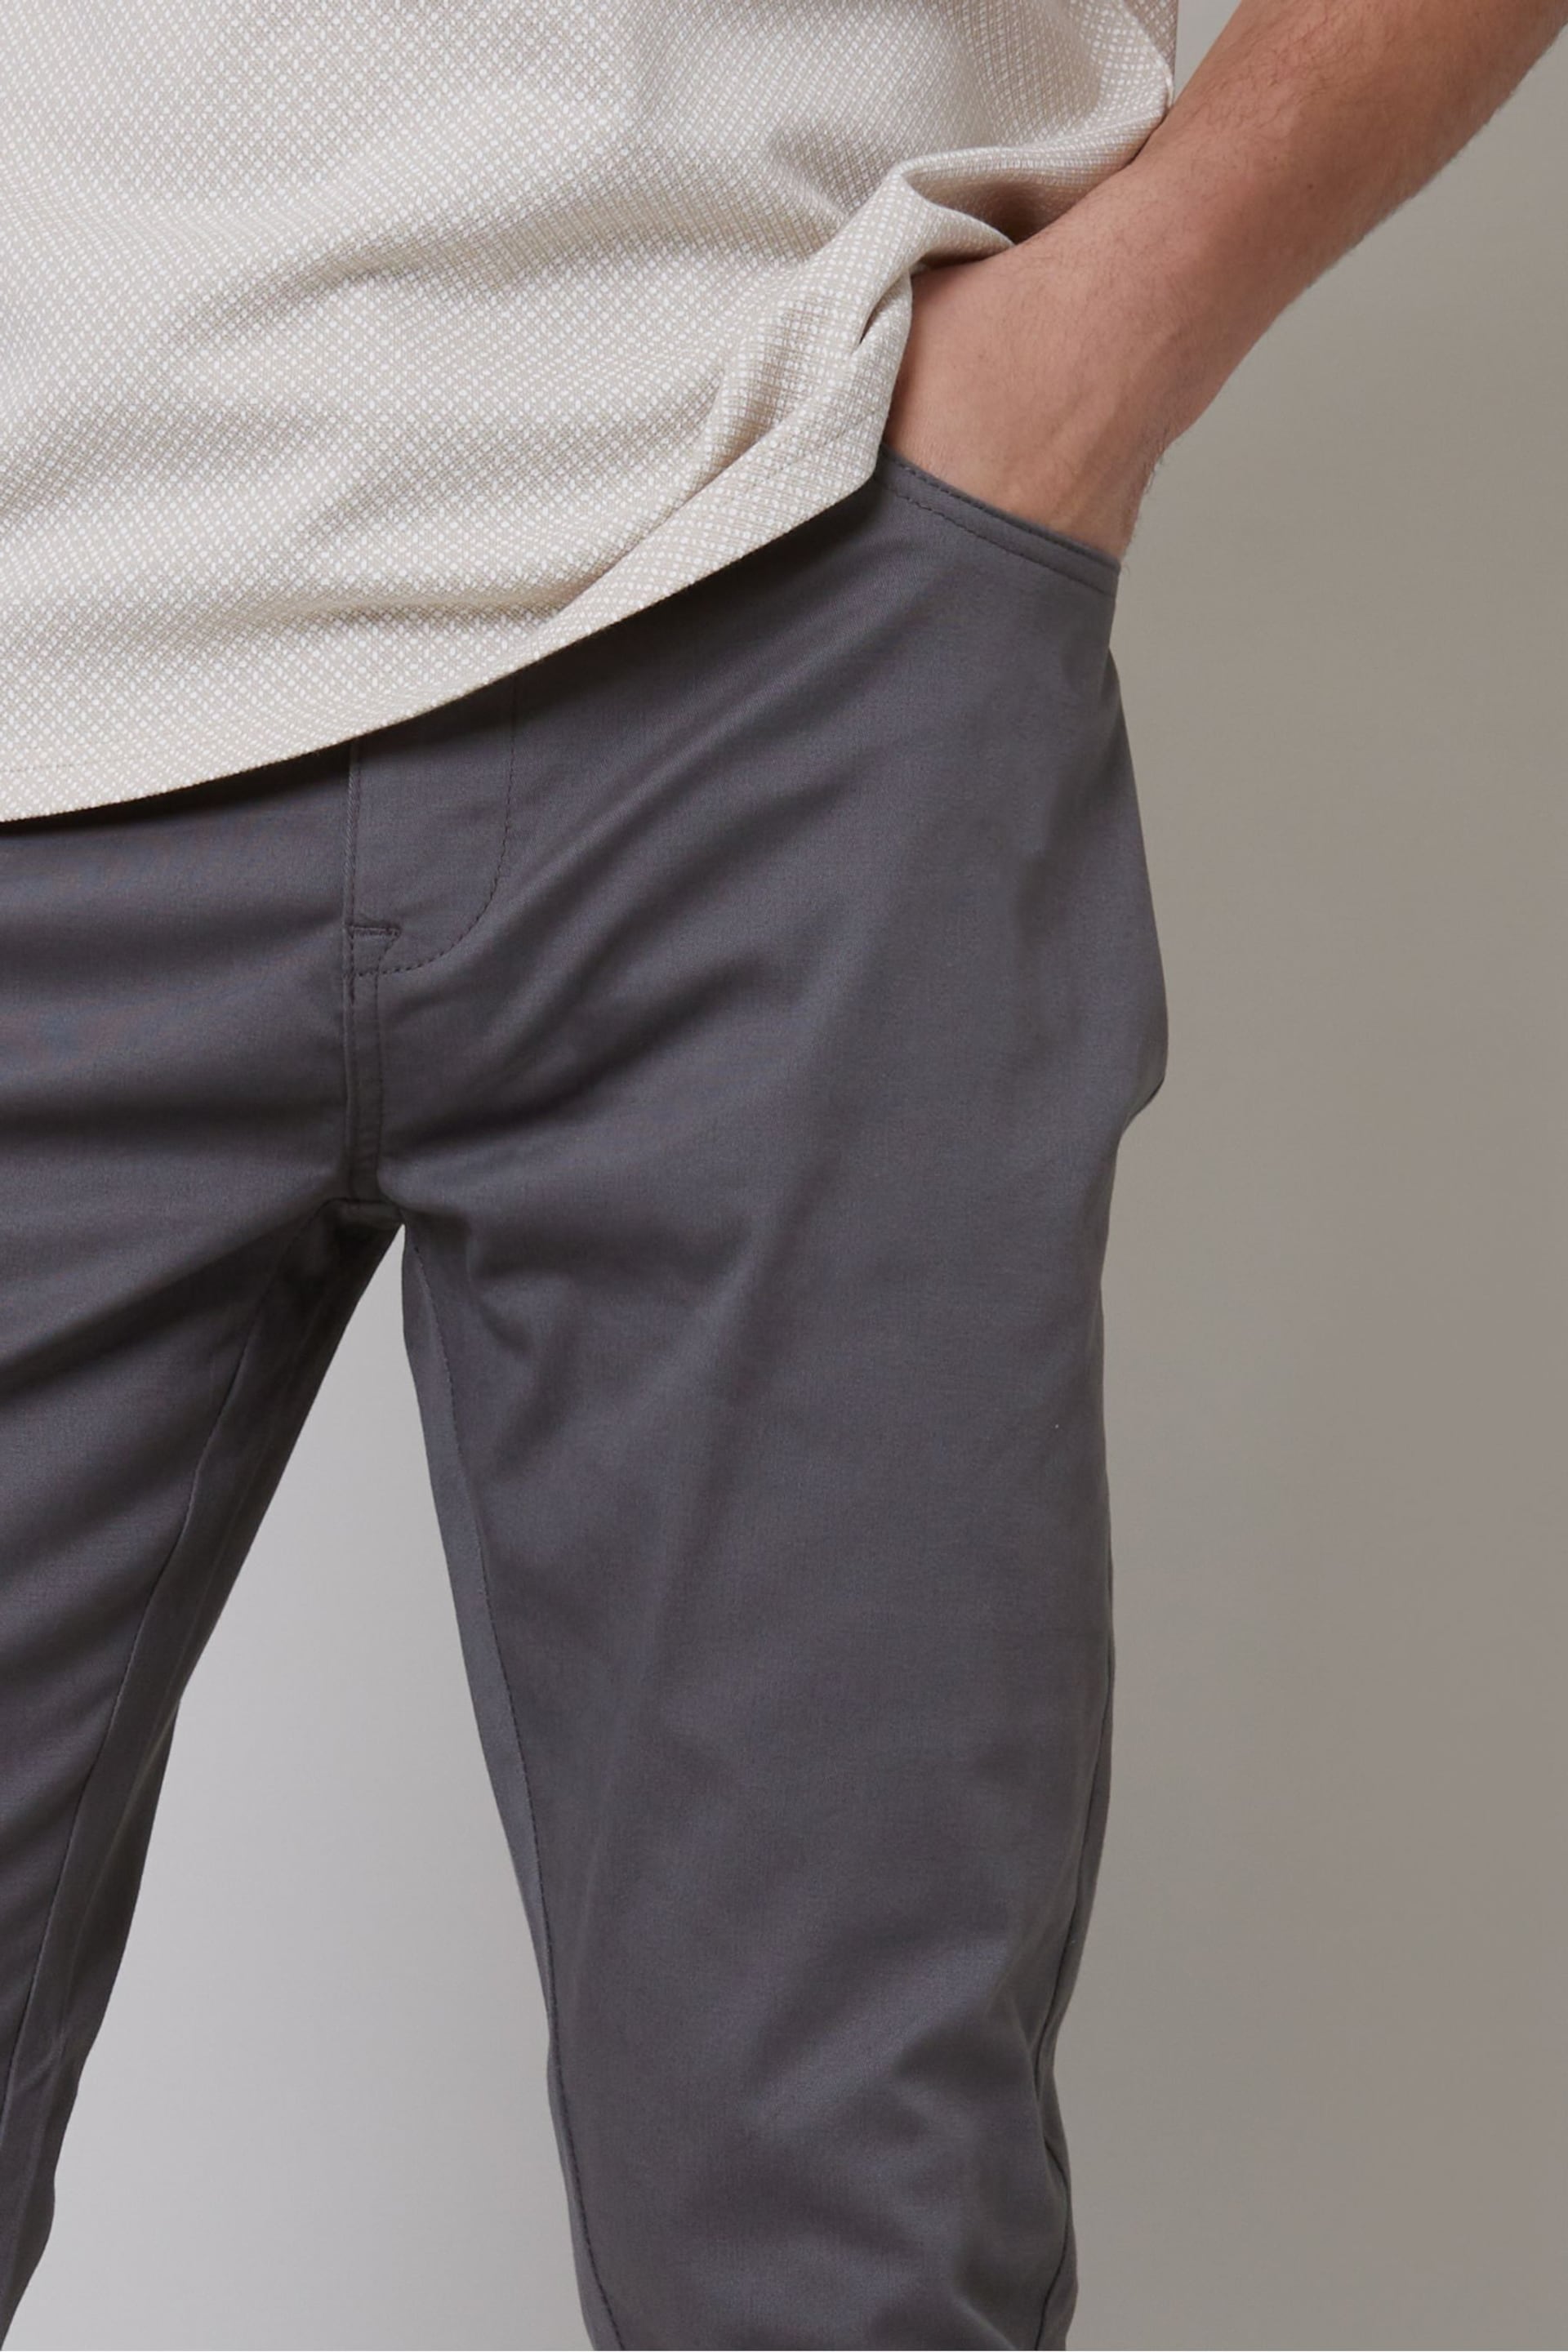 Threadbare Grey Cotton Slim Fit 5 Pocket Chino Trousers With Stretch - Image 4 of 4